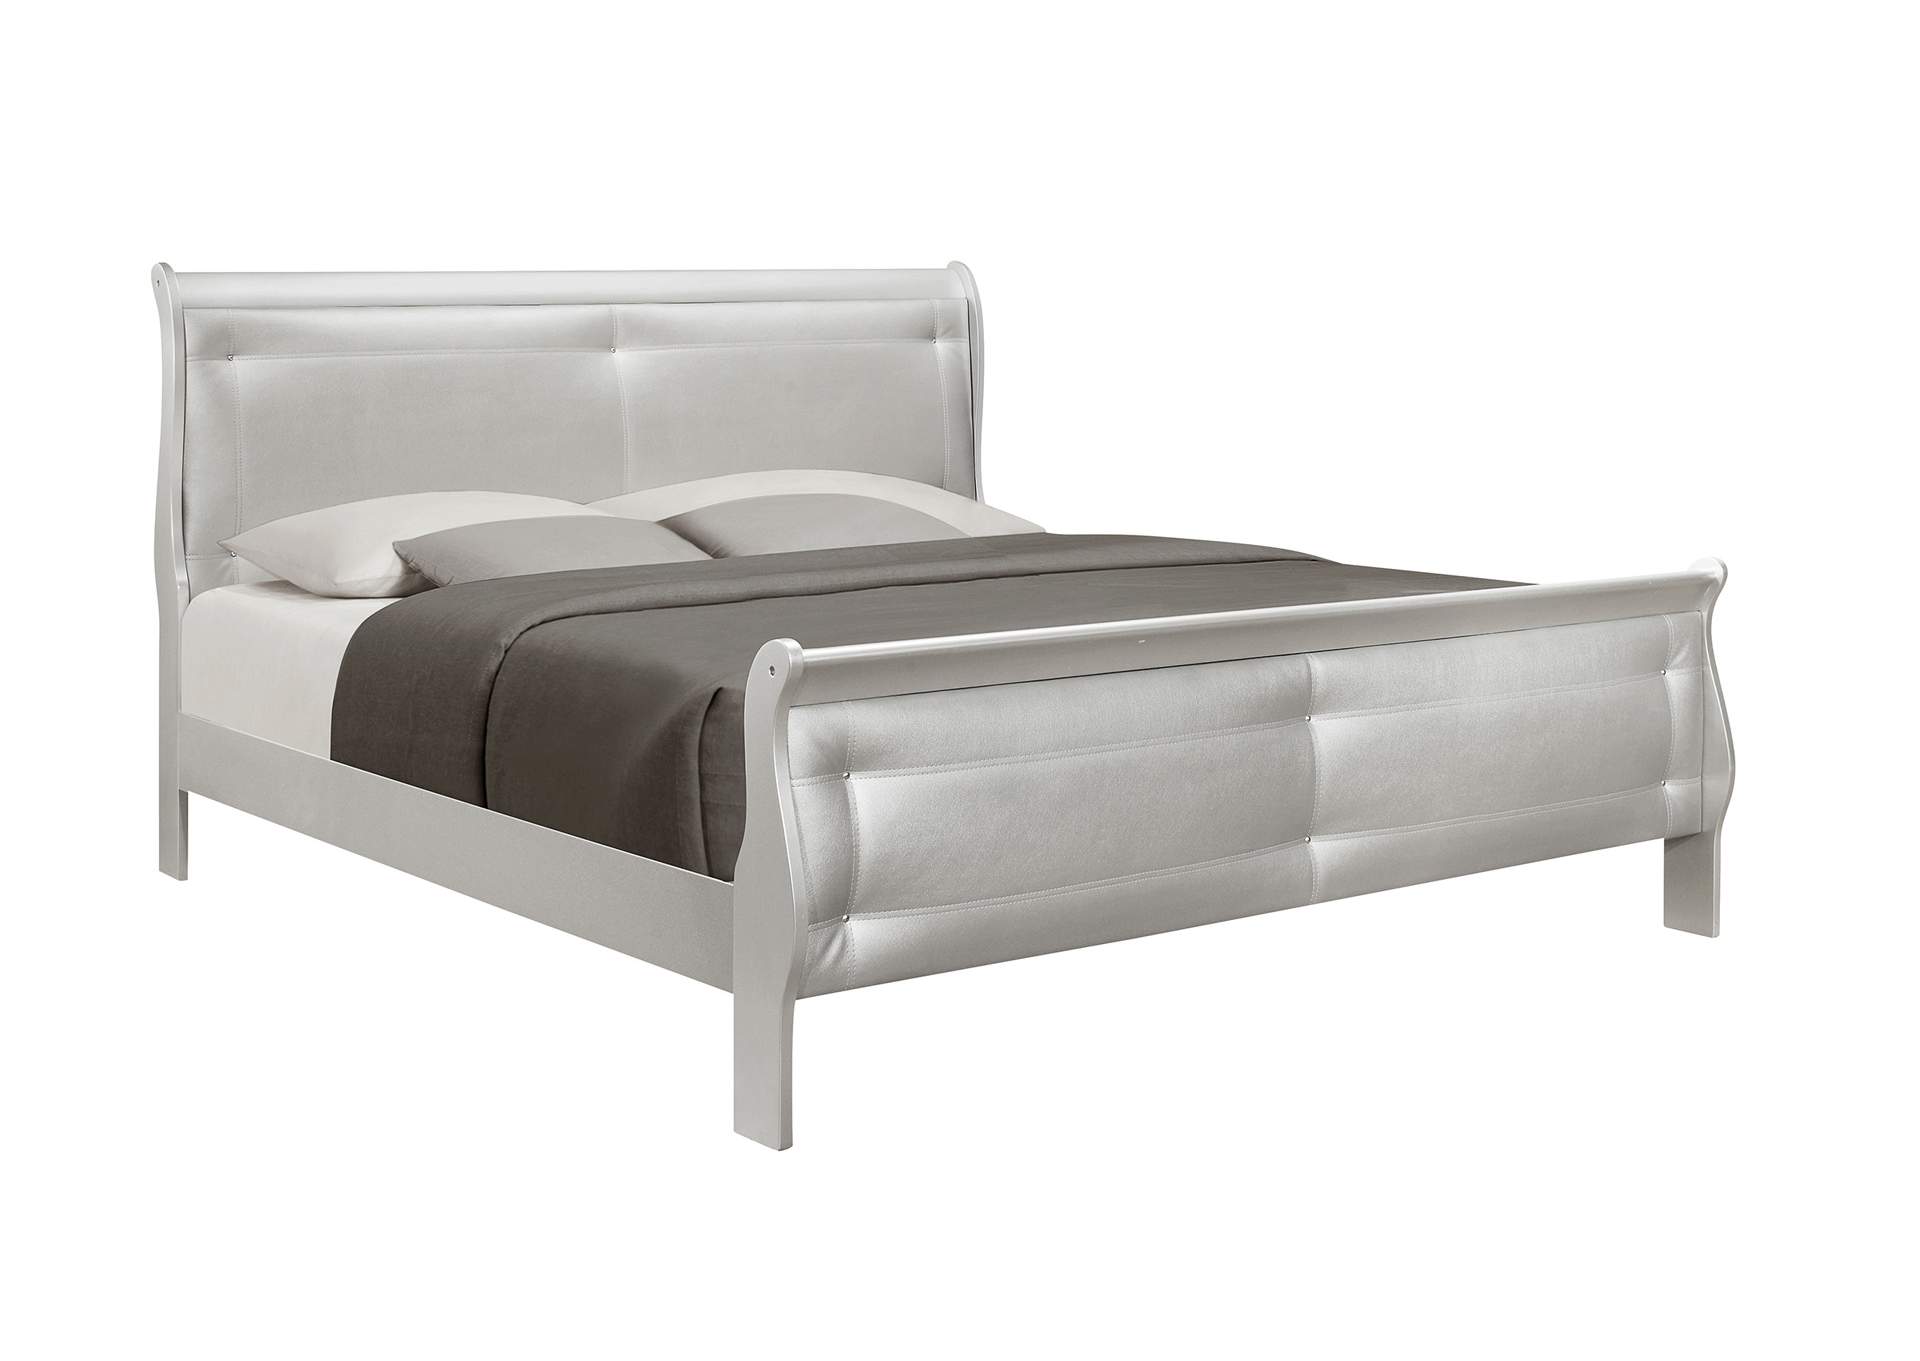 Silver  Marley Queen Bed,Global Furniture USA